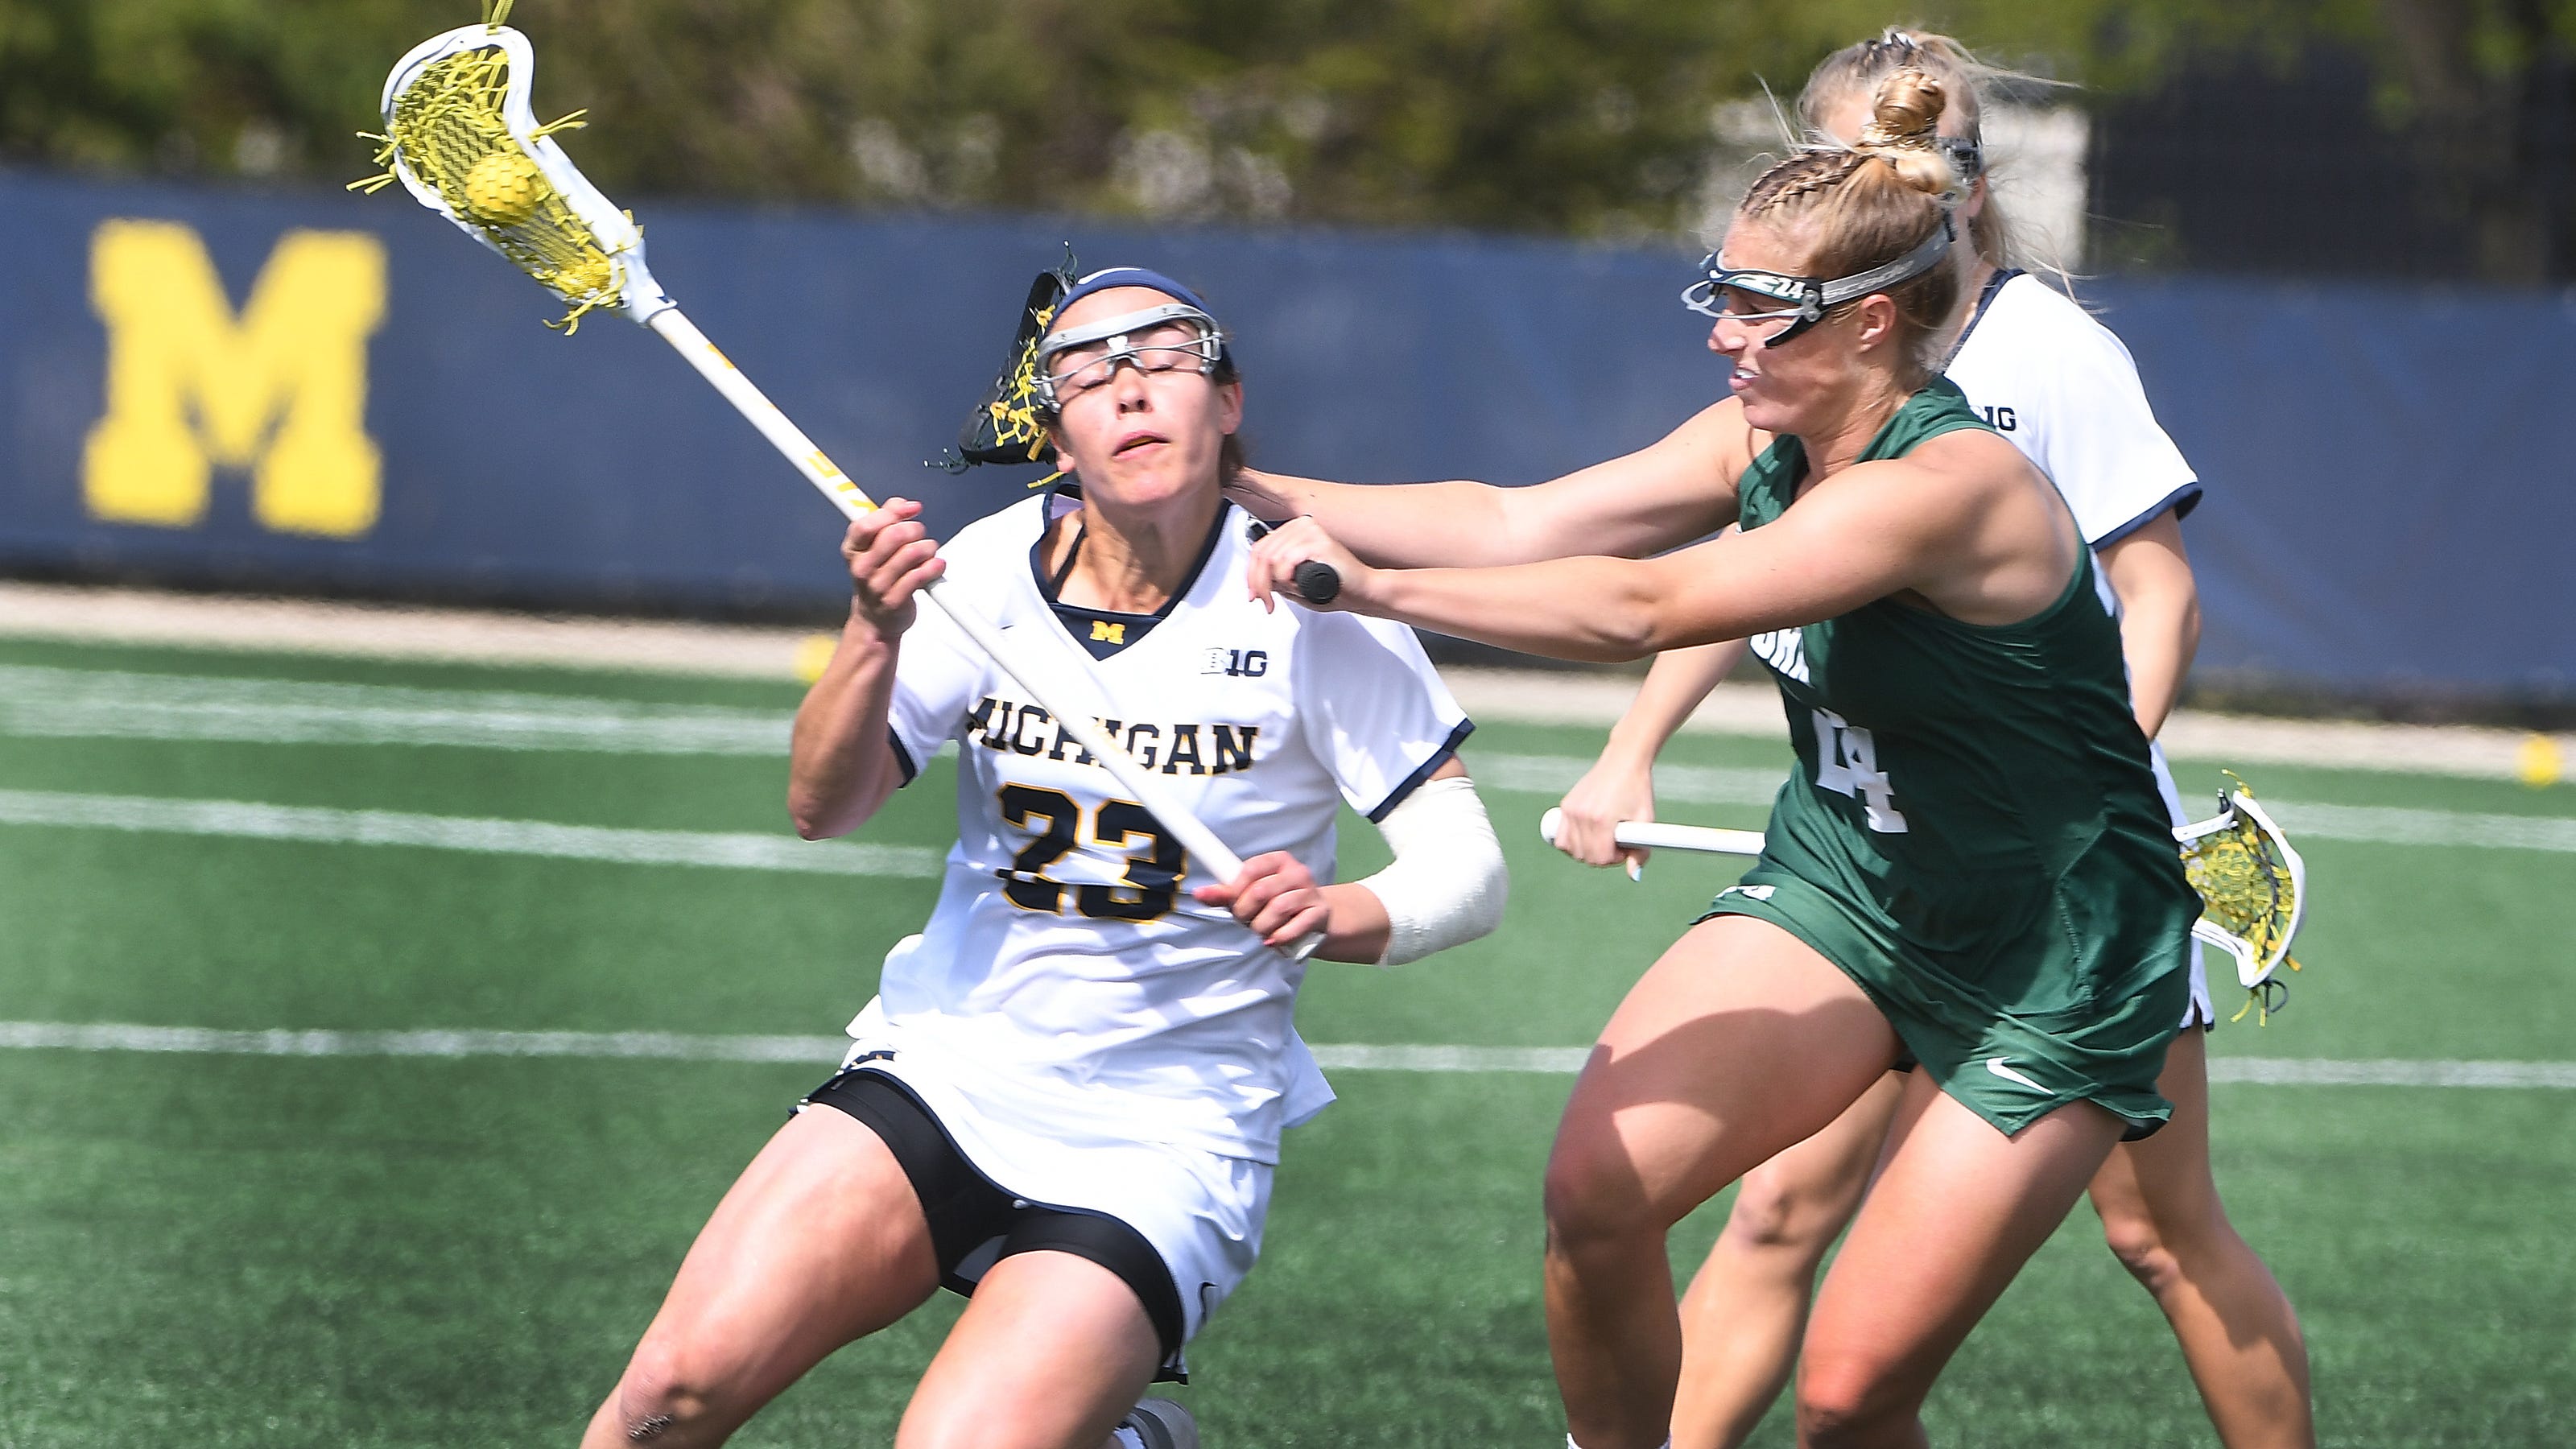 Michigan women's lacrosse bows out in NCAA tournament, but program is